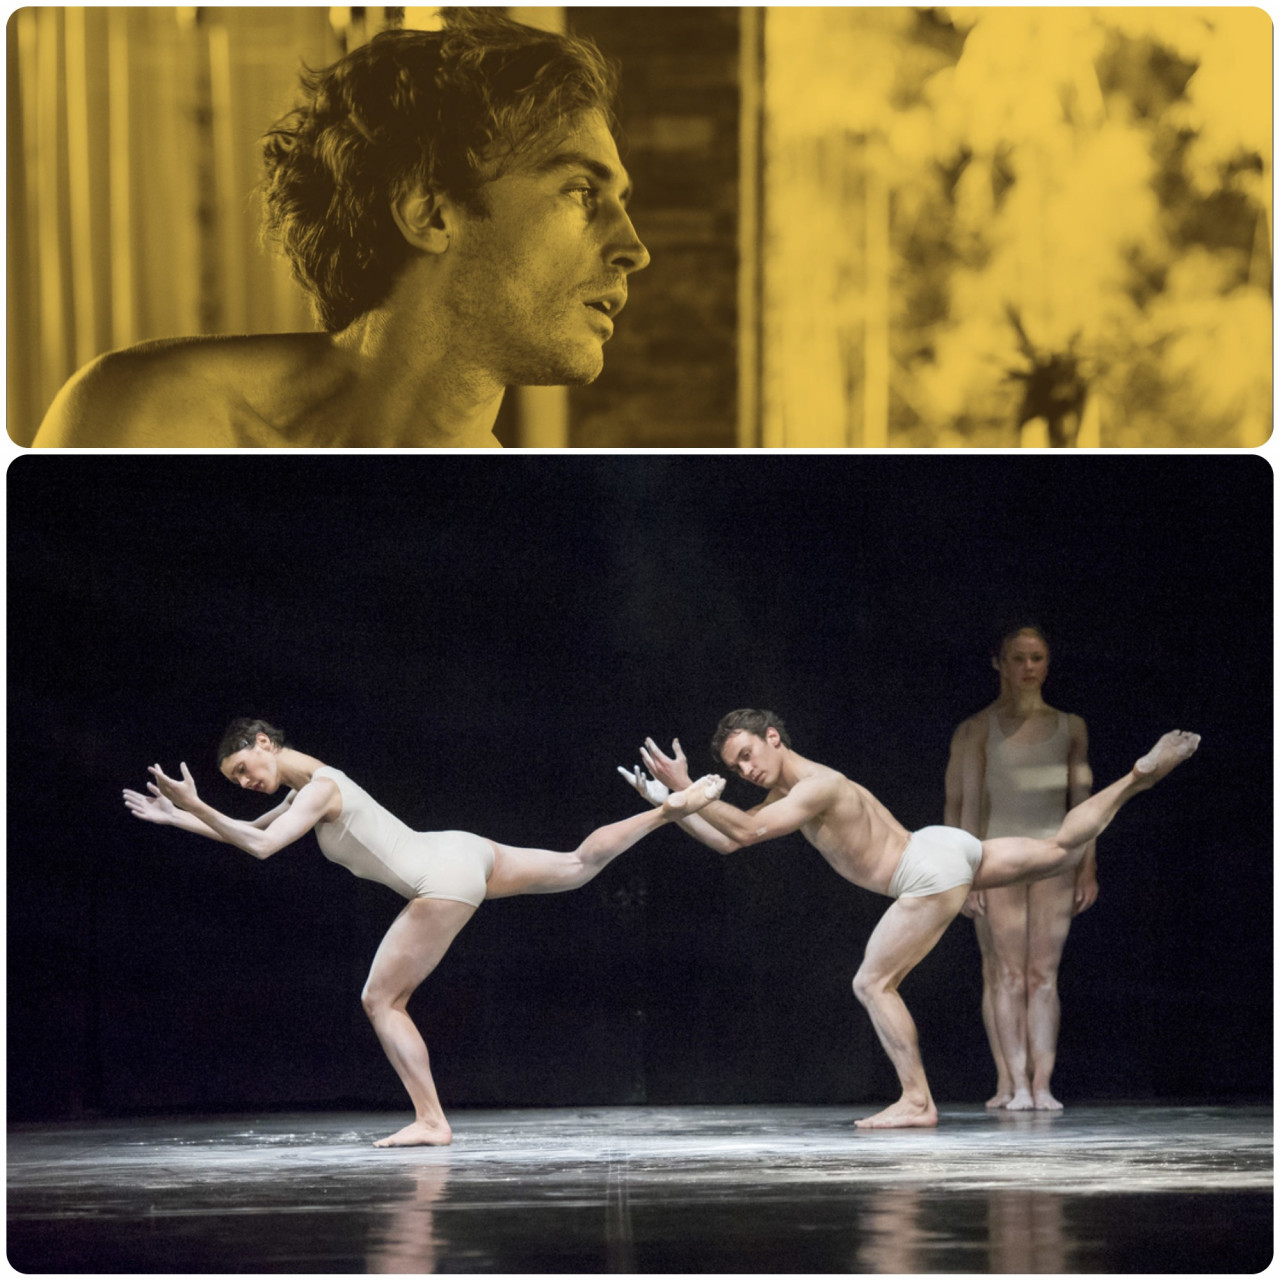 Jueney met Dmitrenko at his workshop at the Federal Academy of Ballet where she was a student. The artistic theory of ‘Resonance’, performed by Meadow Ballet, highlights the dispersion of the elements in a search for harmony and a common language. It depicts the transformation from division and dissonance to unity and resonance. – Pic courtesy of Alexey Dmitrenko